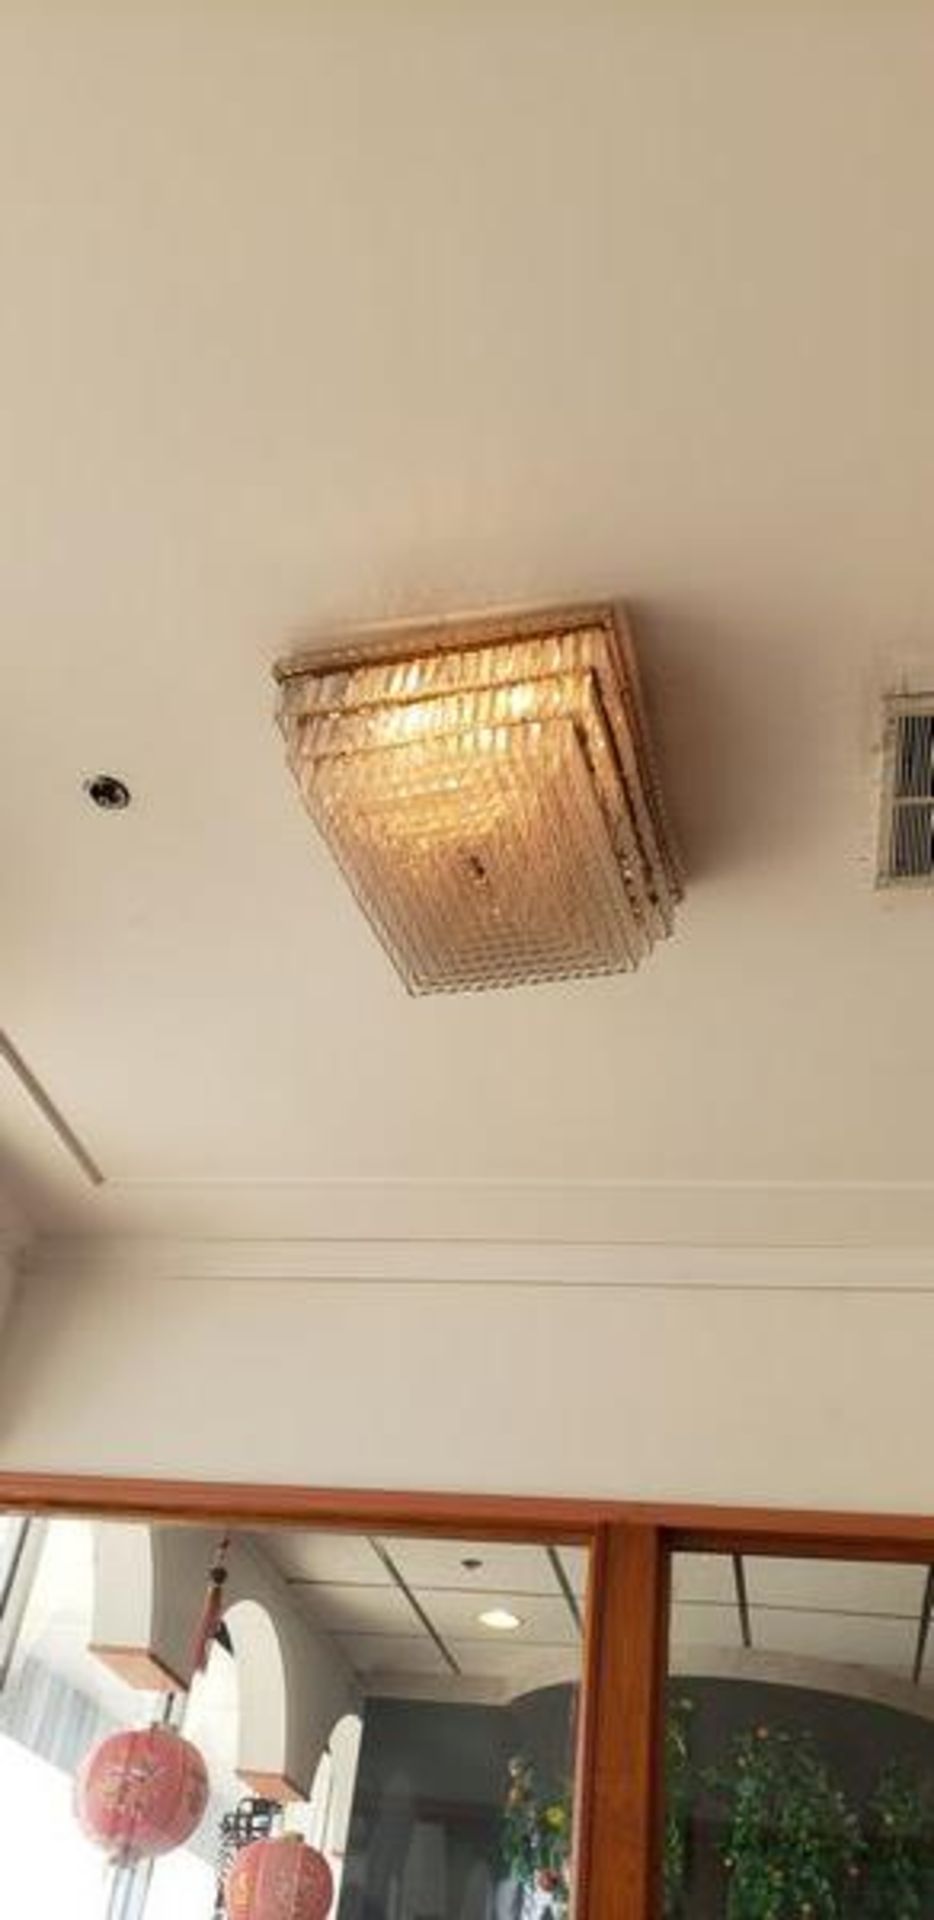 CHANDELIER (CEILING MOUNTED) - Image 2 of 2